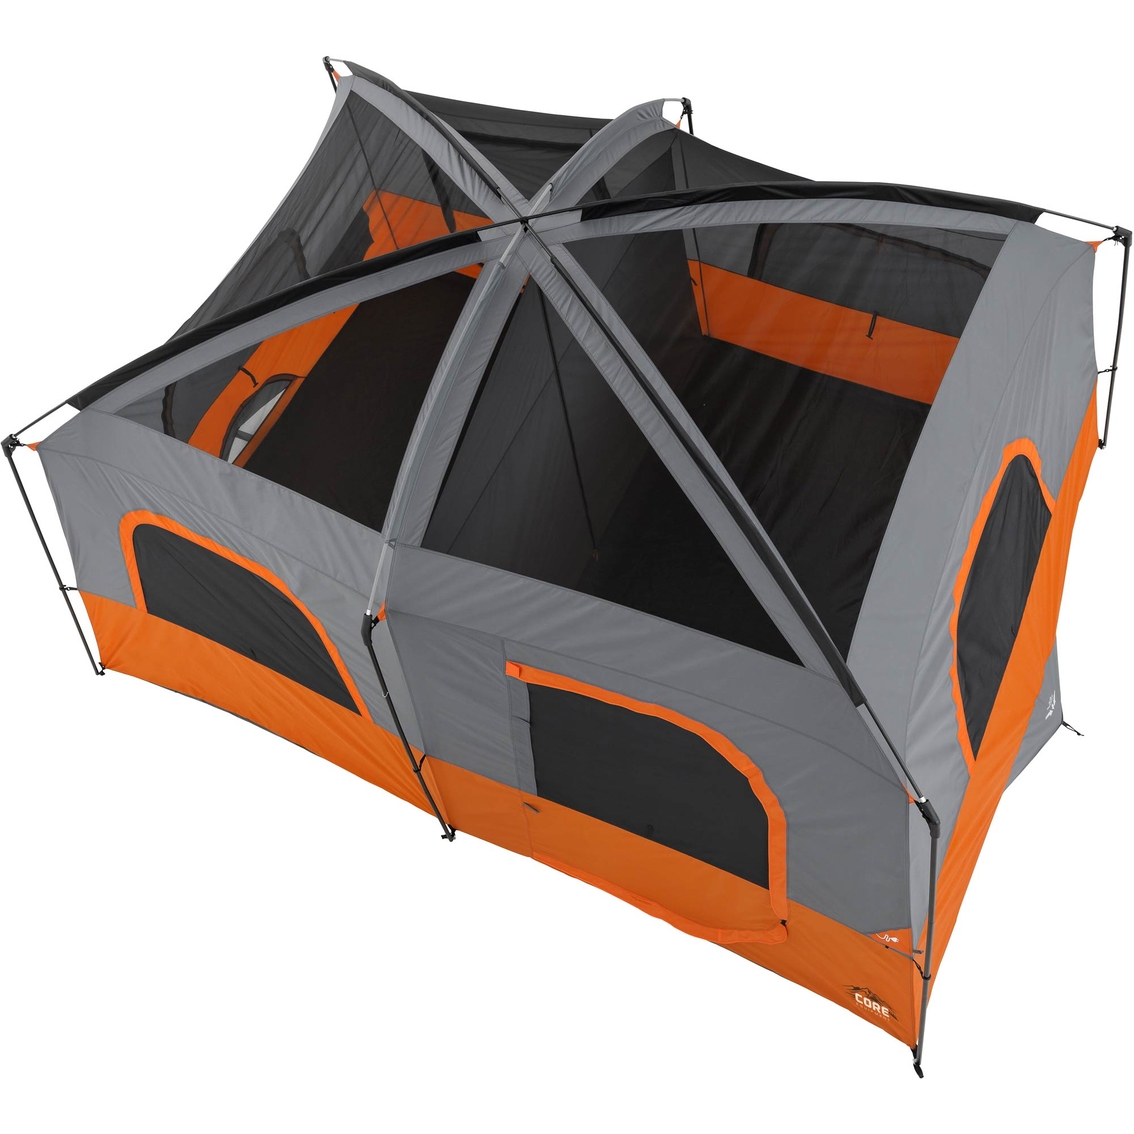 Core Equipment 10 Person Straight Wall Cabin Tent, Tents